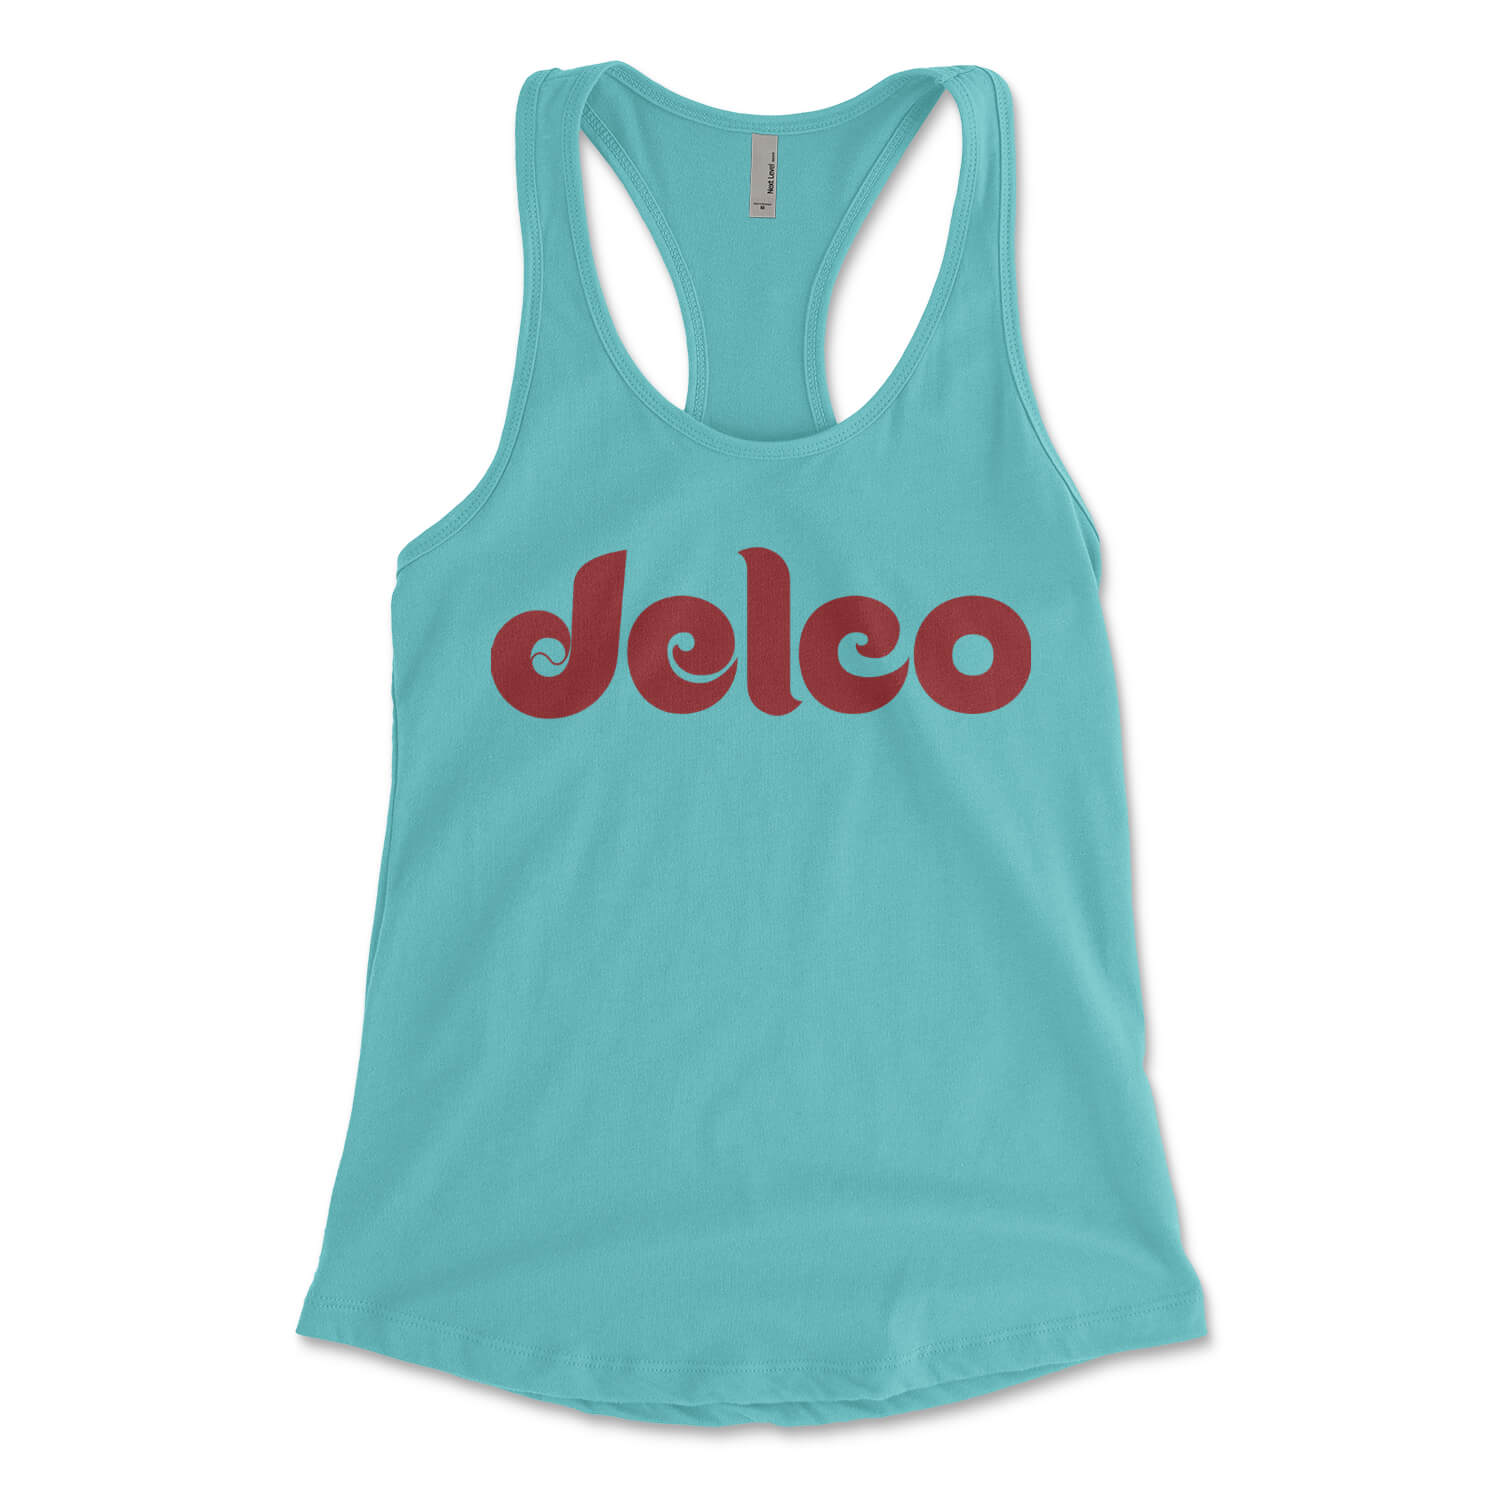 Delco tahiti blue womens racerback tank top from Phillygoat